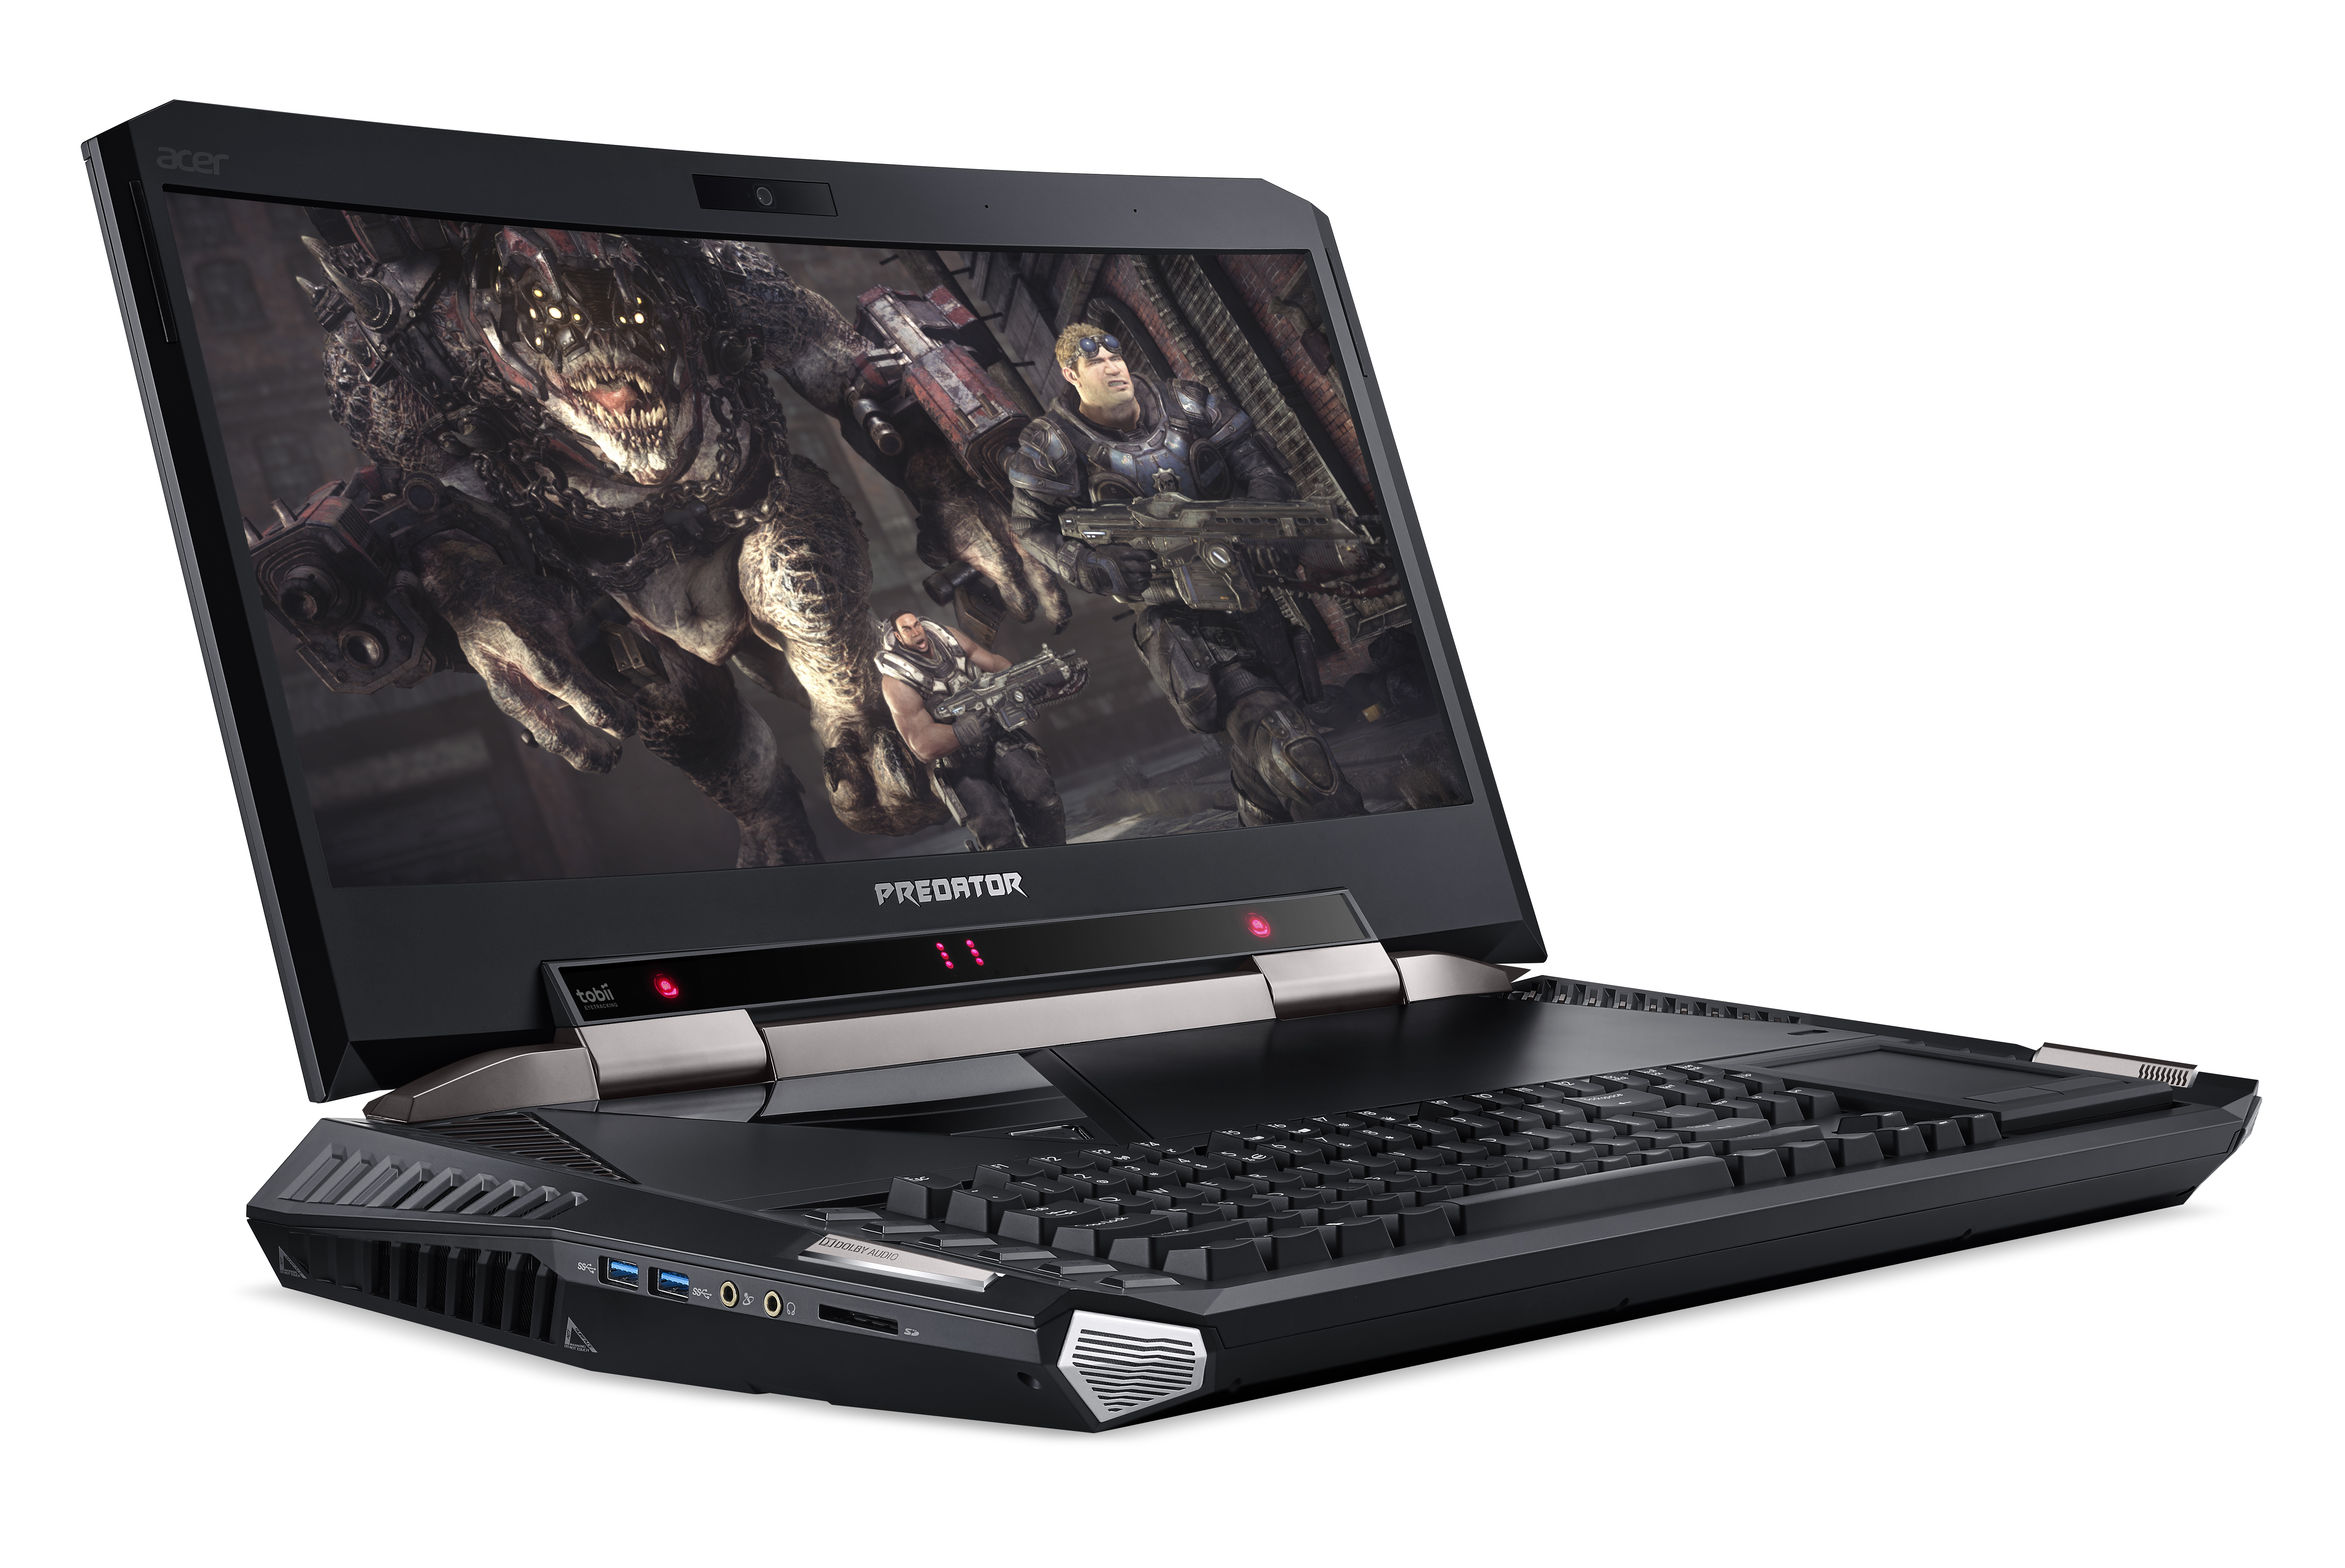 Acer Predator 21 X Gaming Laptop with 21inch Curved Screen